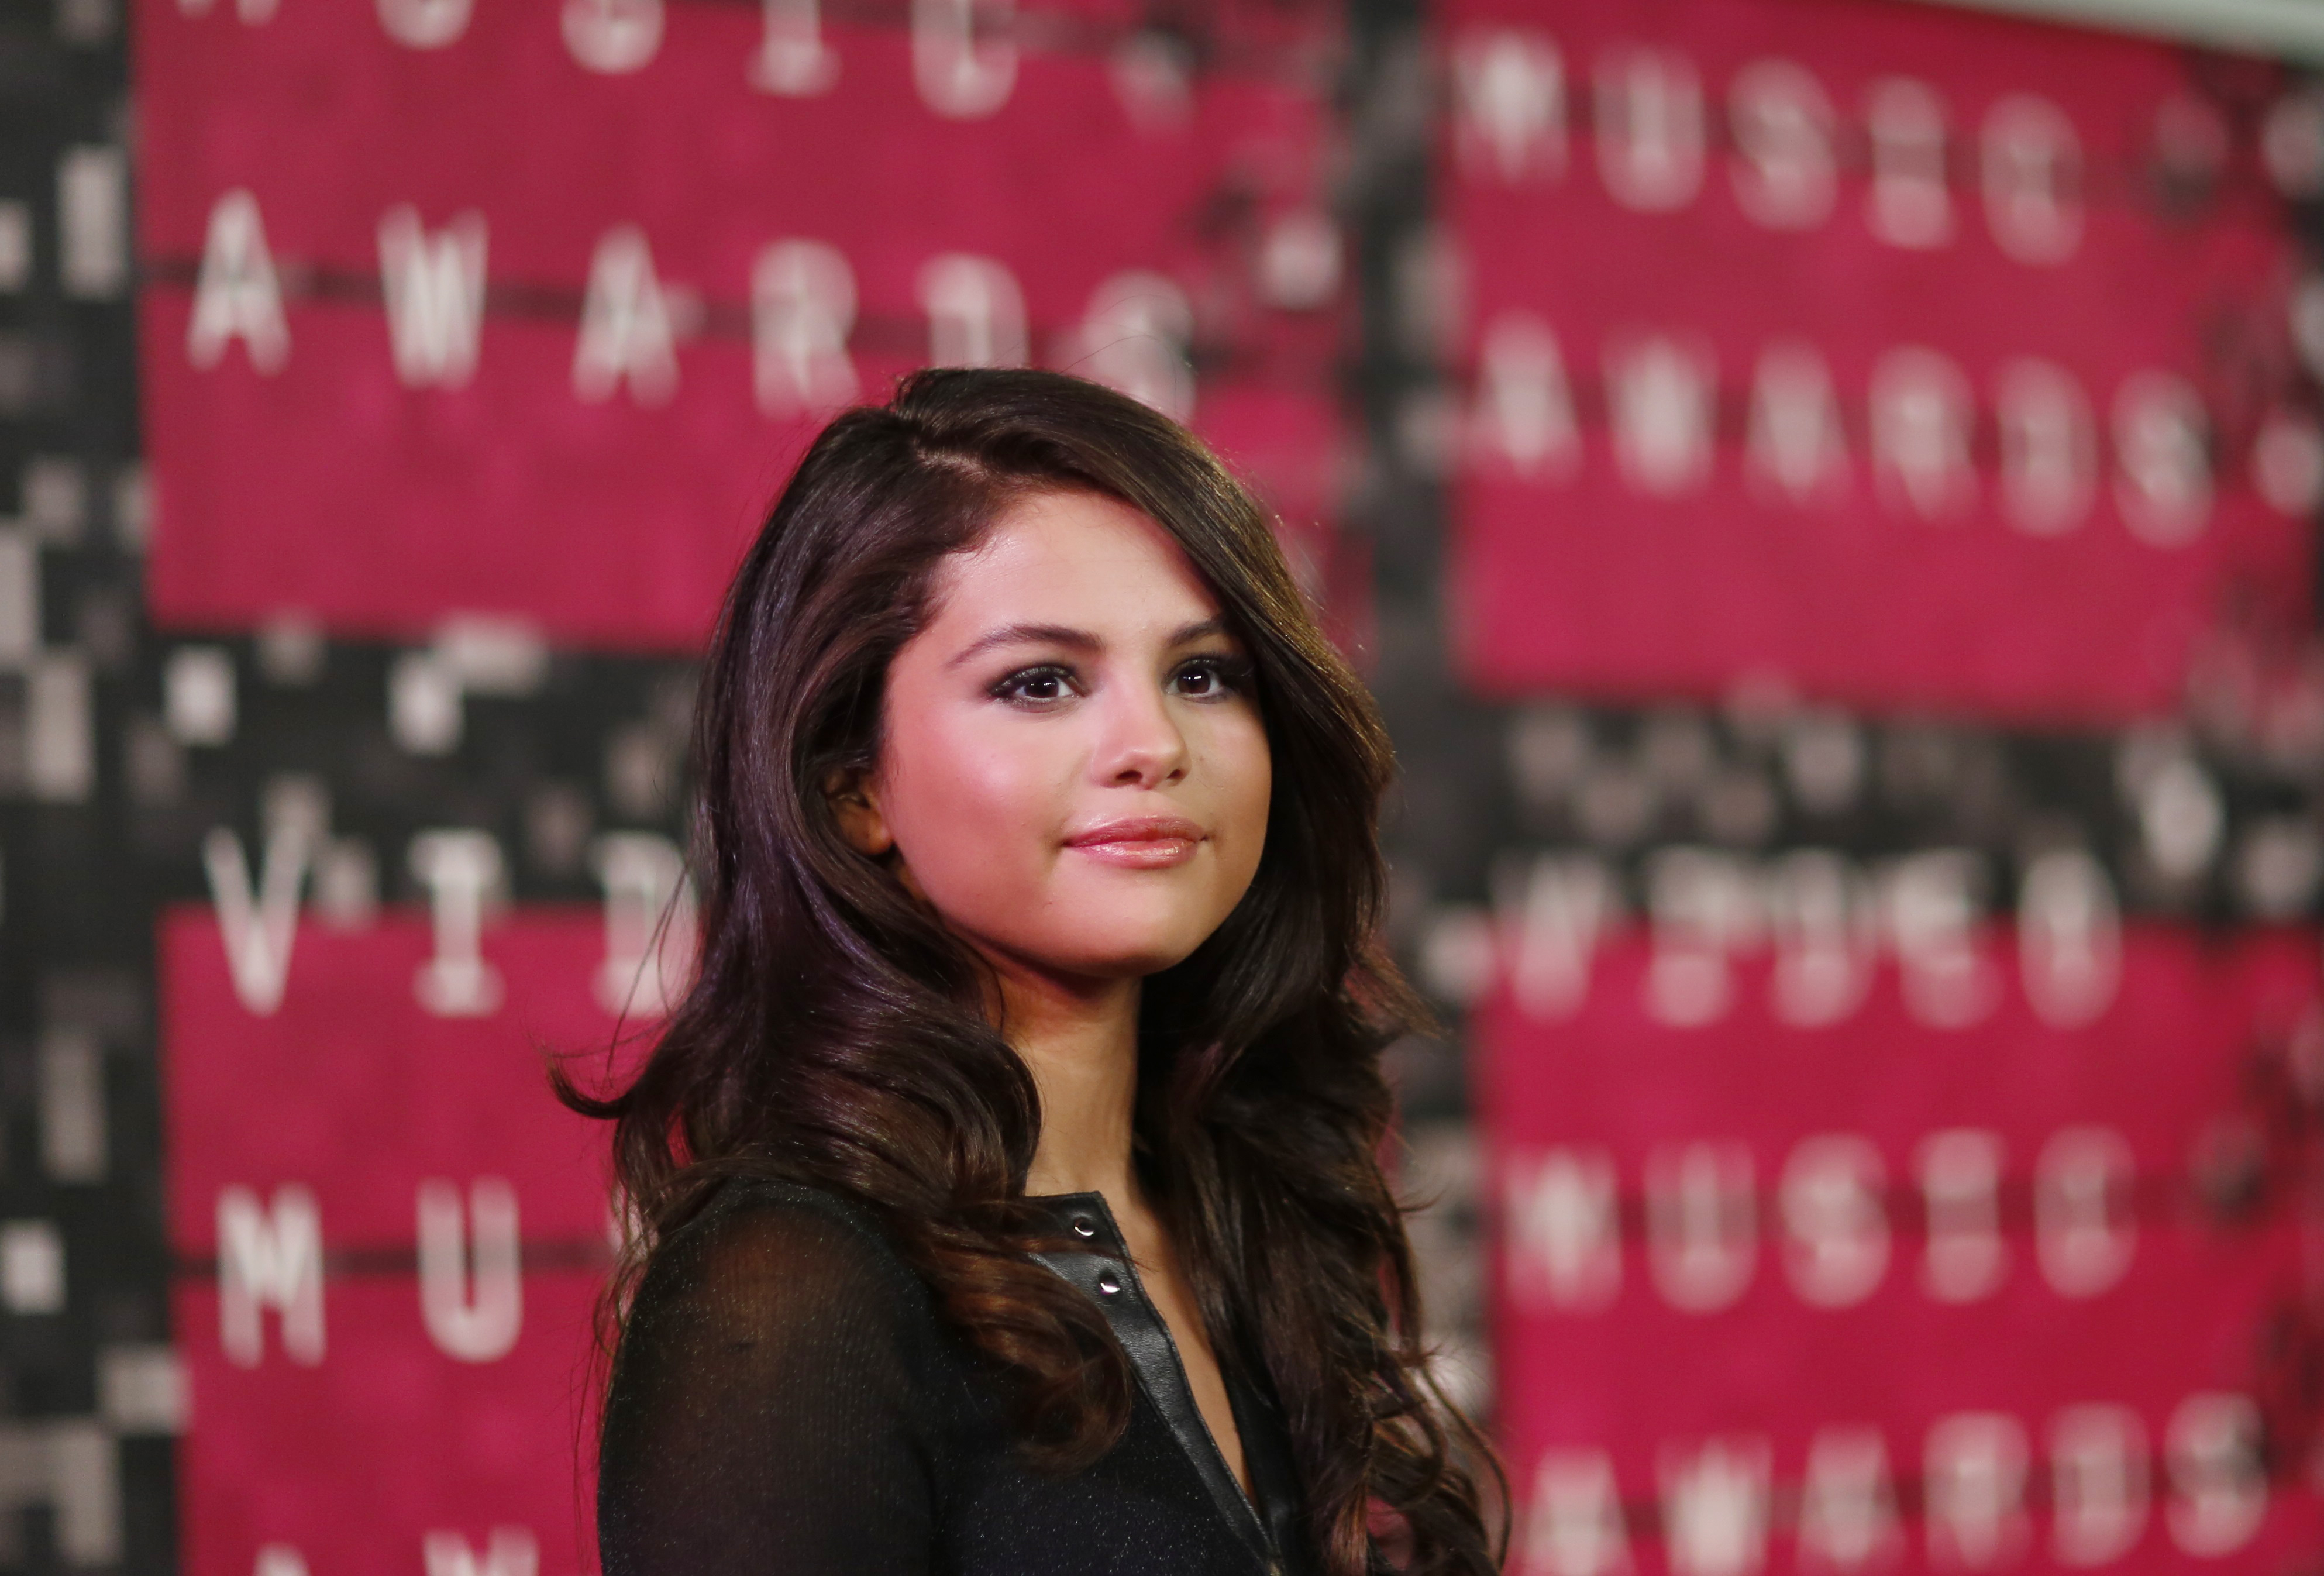 Singer Selena Gomez arrives at the 2015 MTV Video Music Awards in Los Angeles